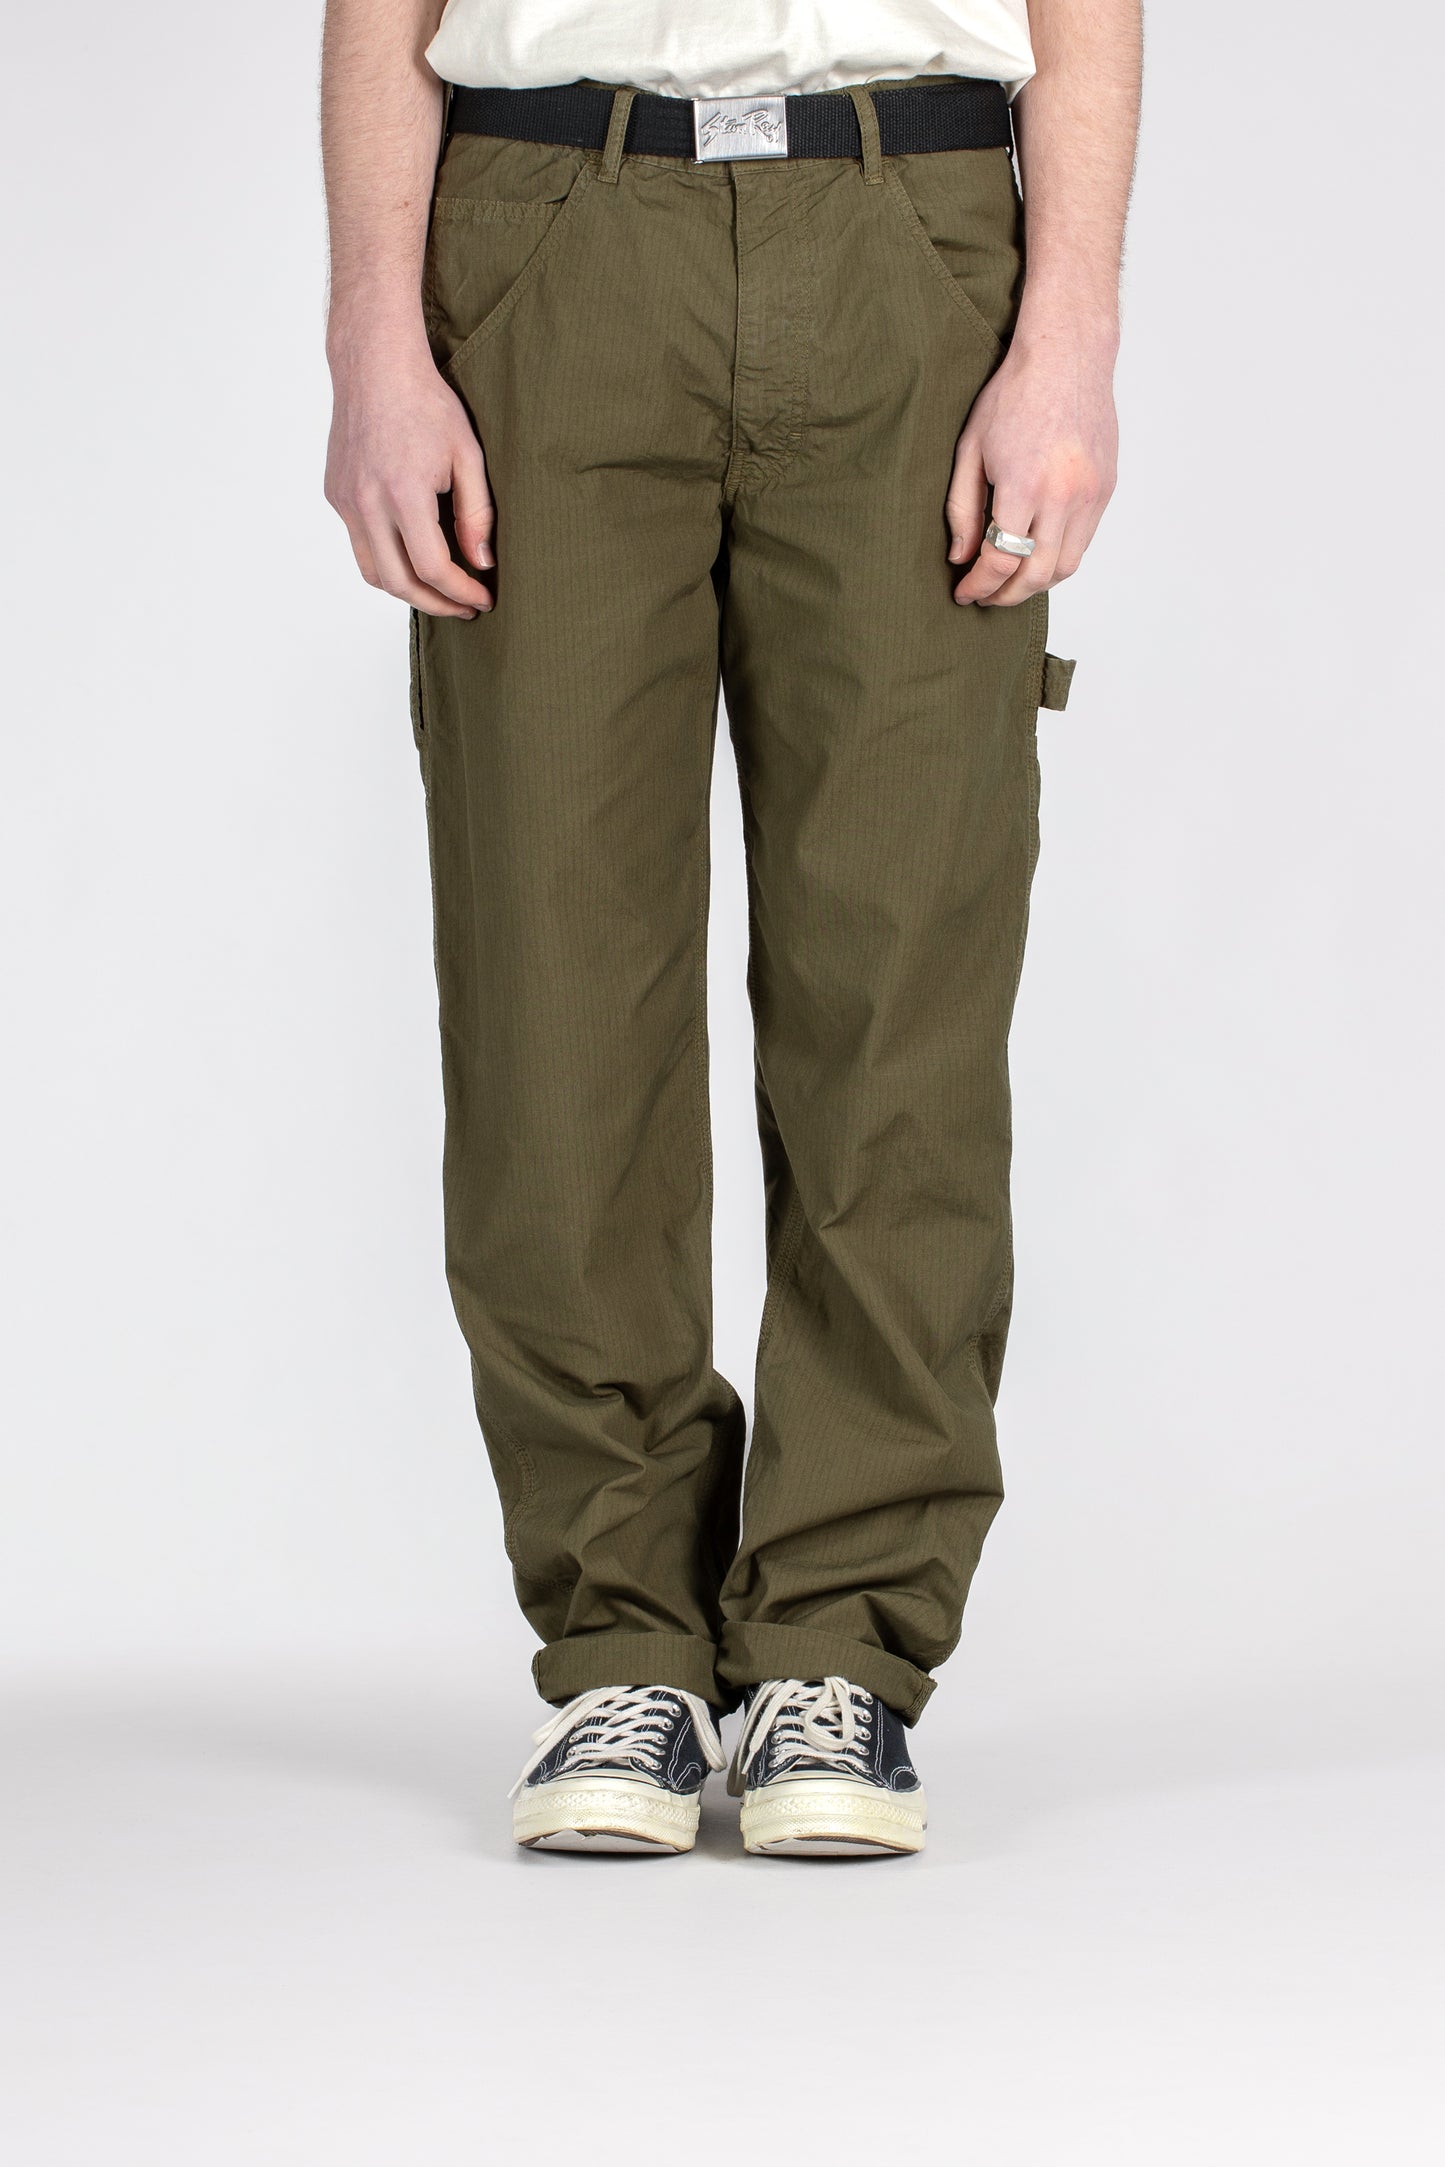 80s Painter Pant (Olive Ripstop)